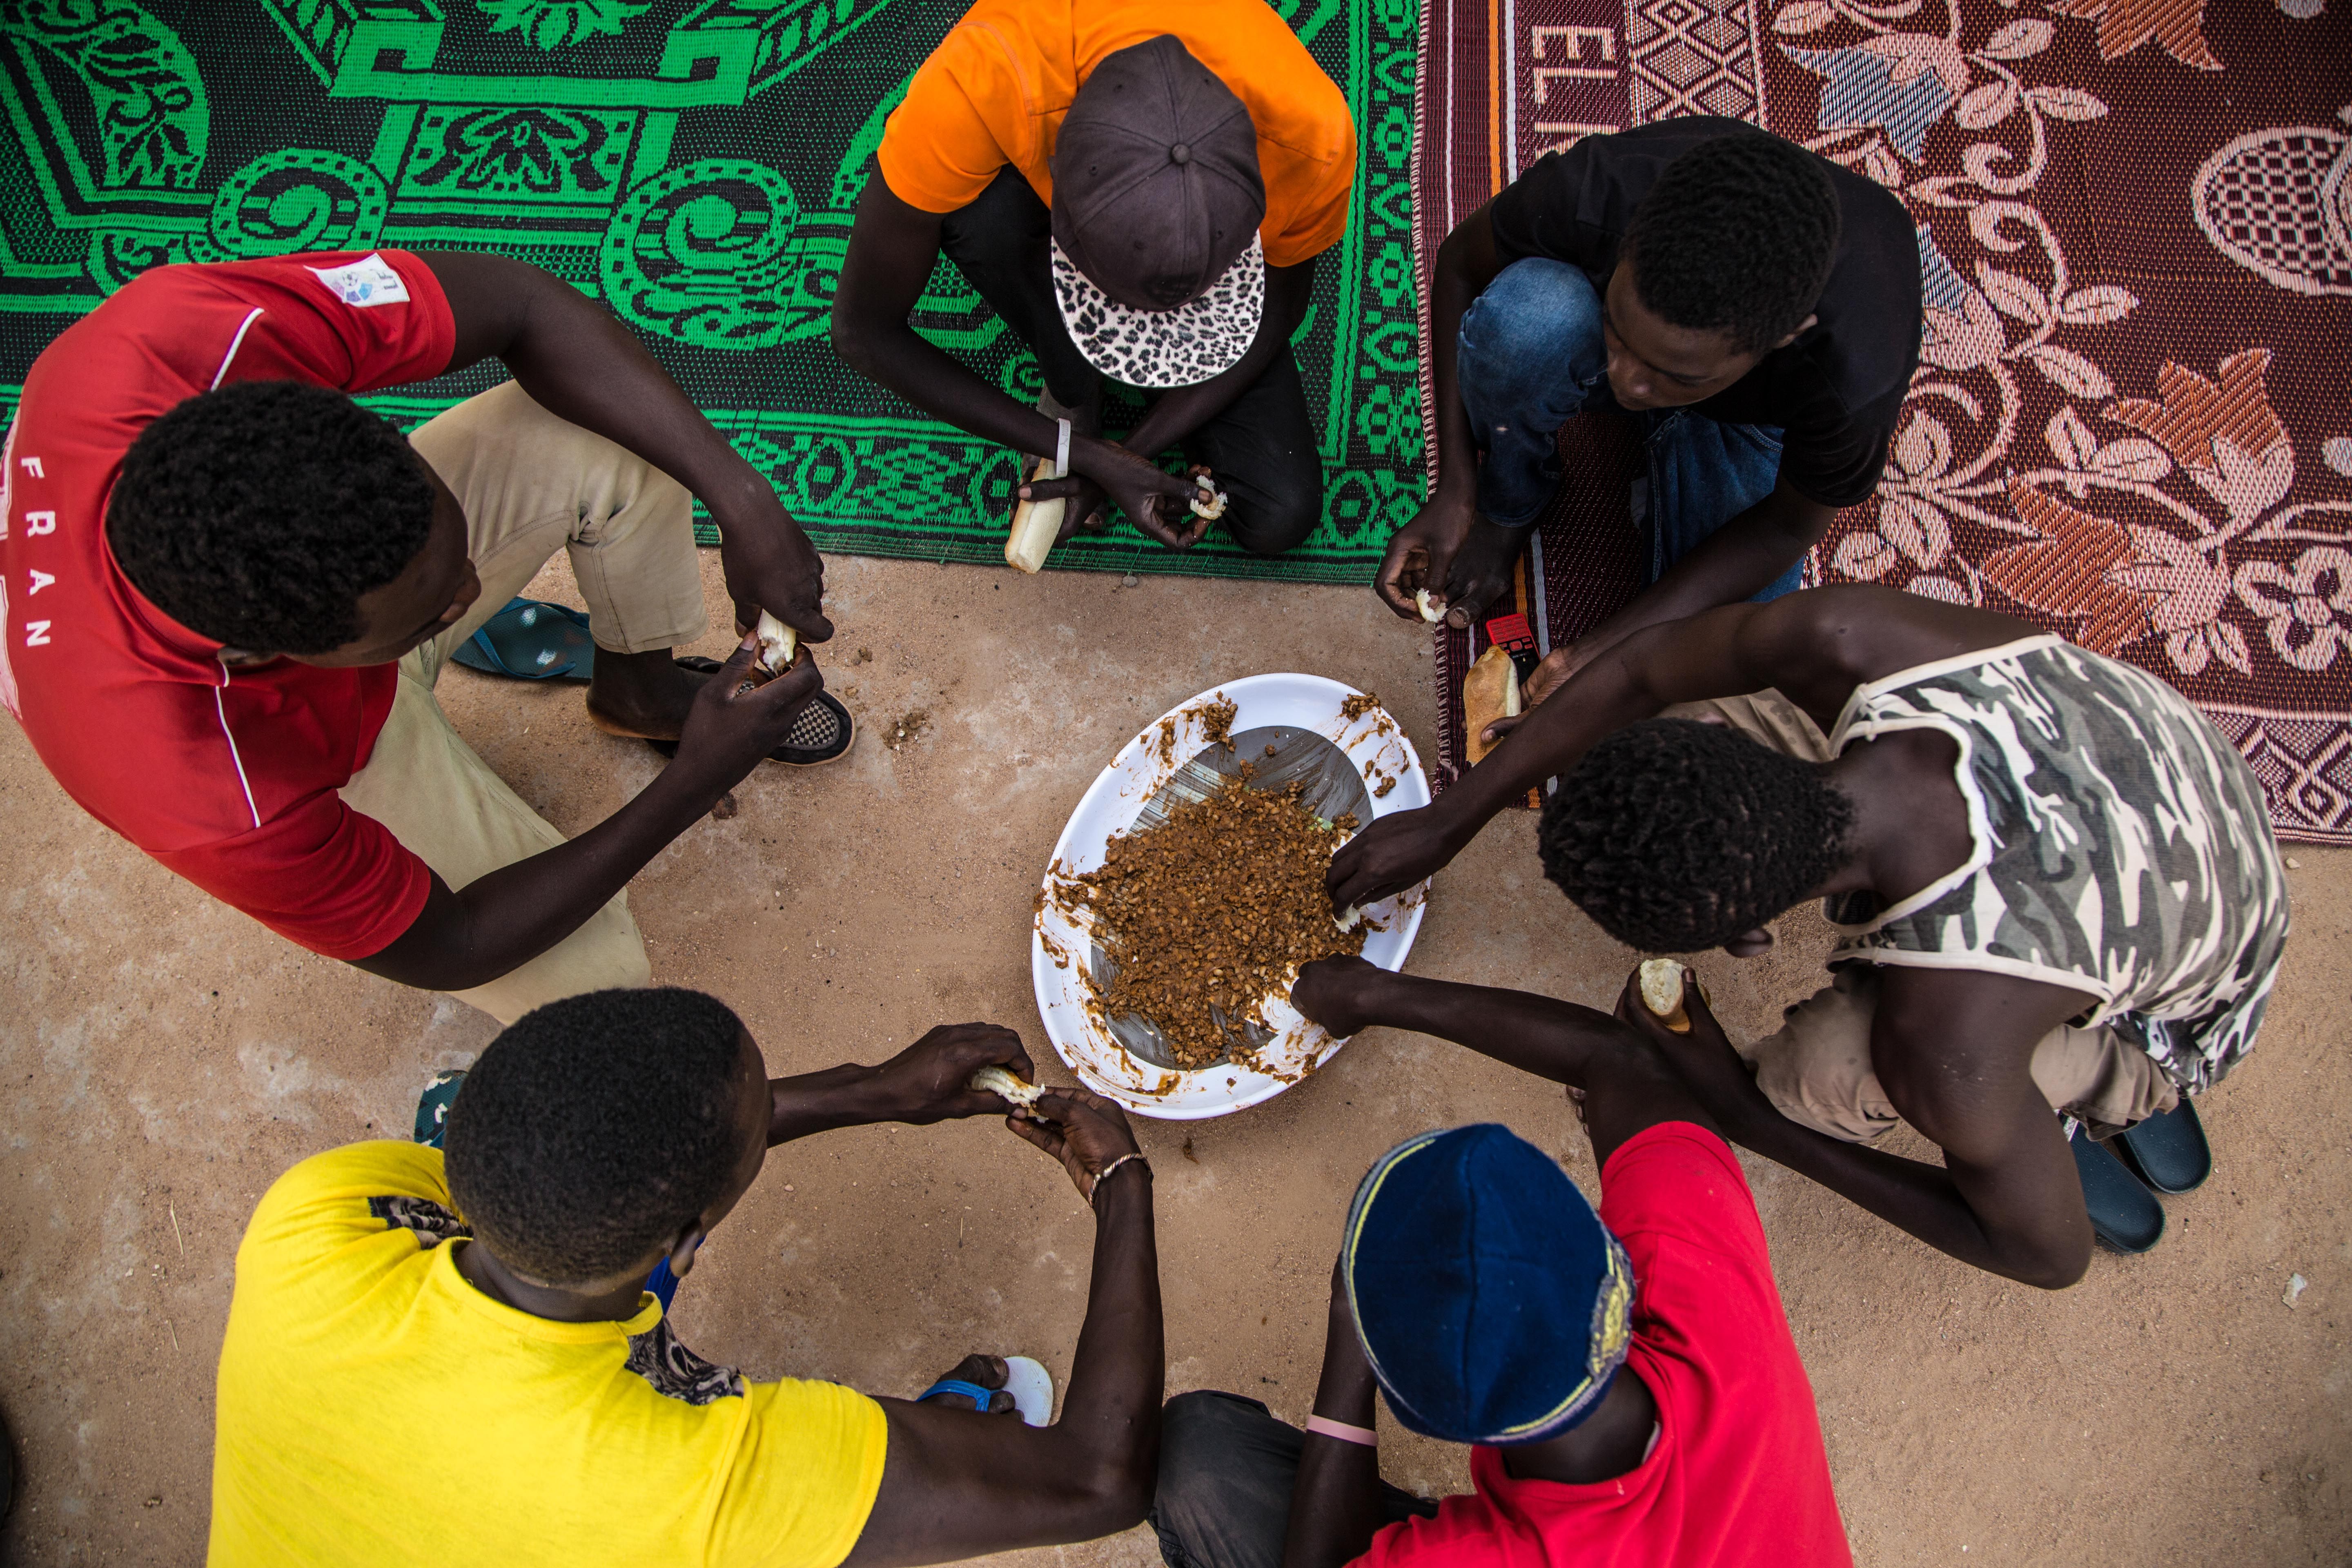 Migrants eat a meager meal of beans before making the dangerous trek into the Saharan desert and on to Libya. Image by Emily Kassie. Niger, 2016.